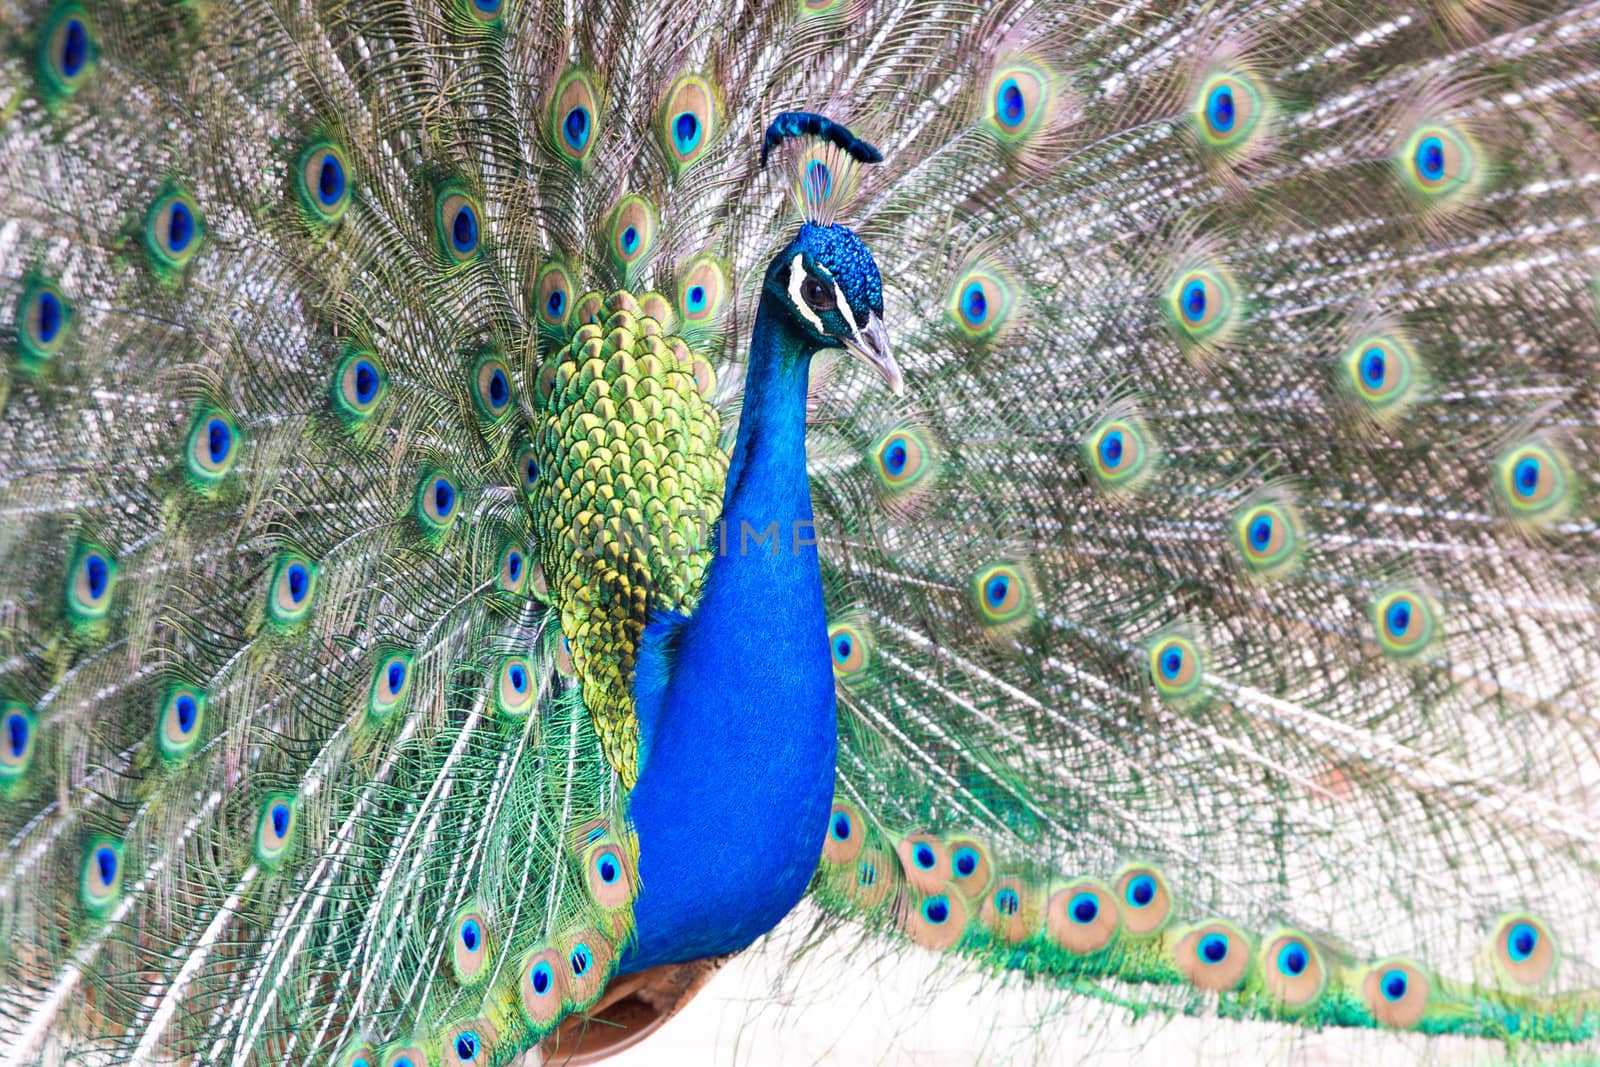 Beautiful male peacock displaying the colourful feathers of its fanned out tail in a mating ritual. Photo taken with shallow depth of field.